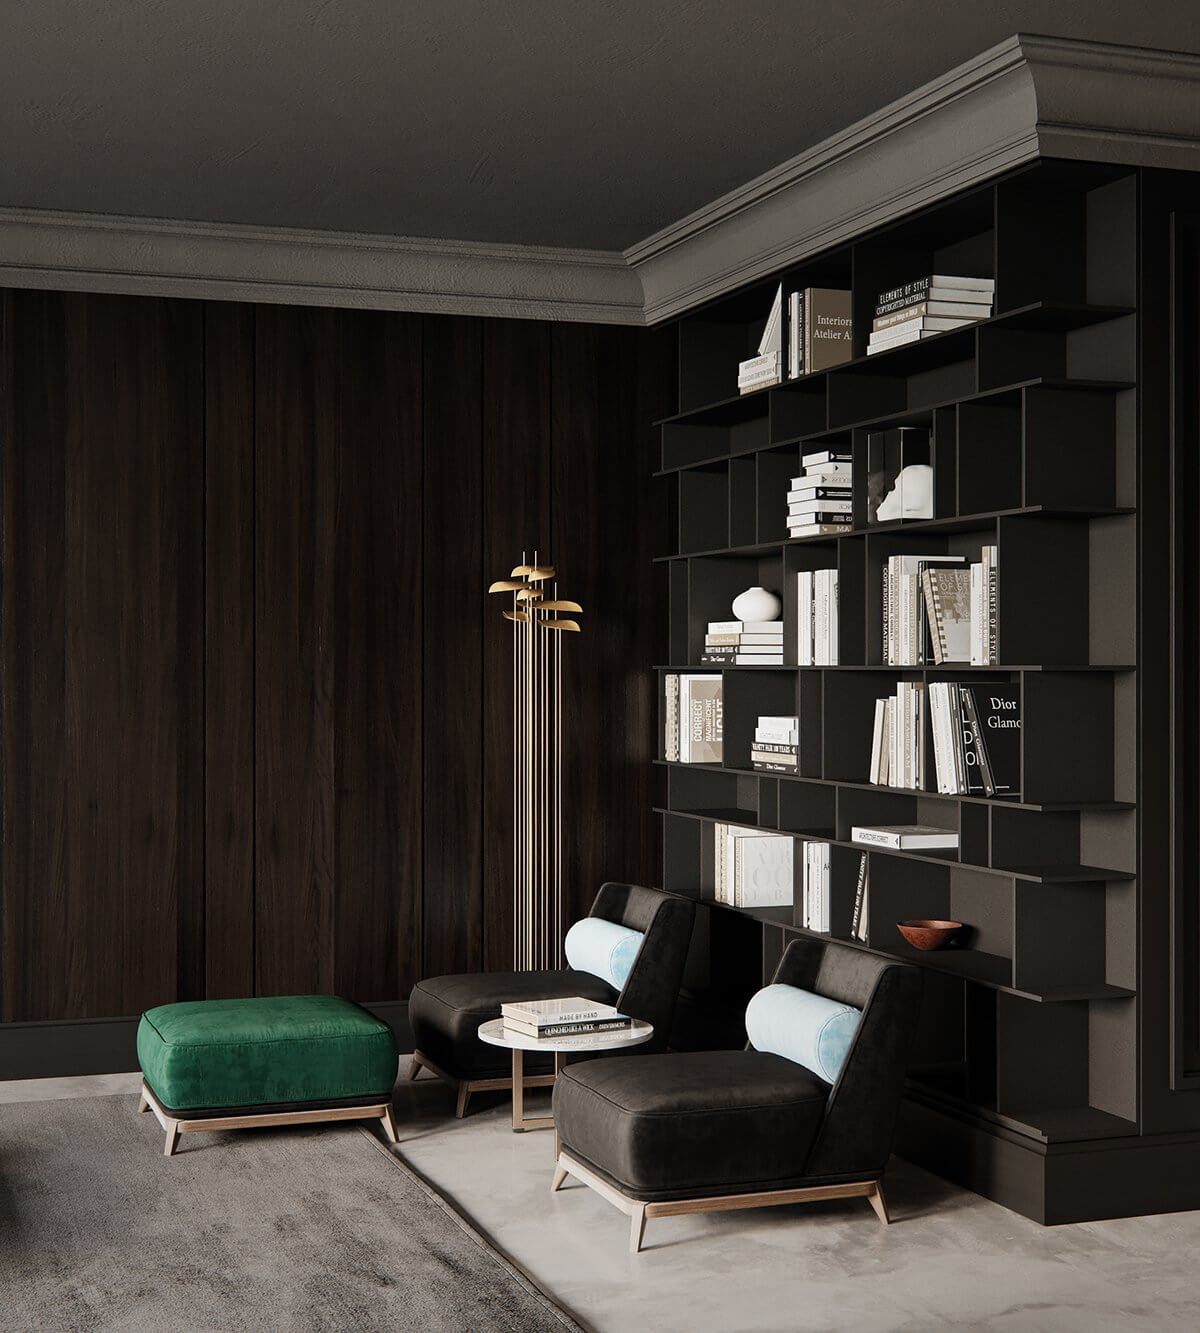 Moscow apartment living room book cabinet - cgi visualization